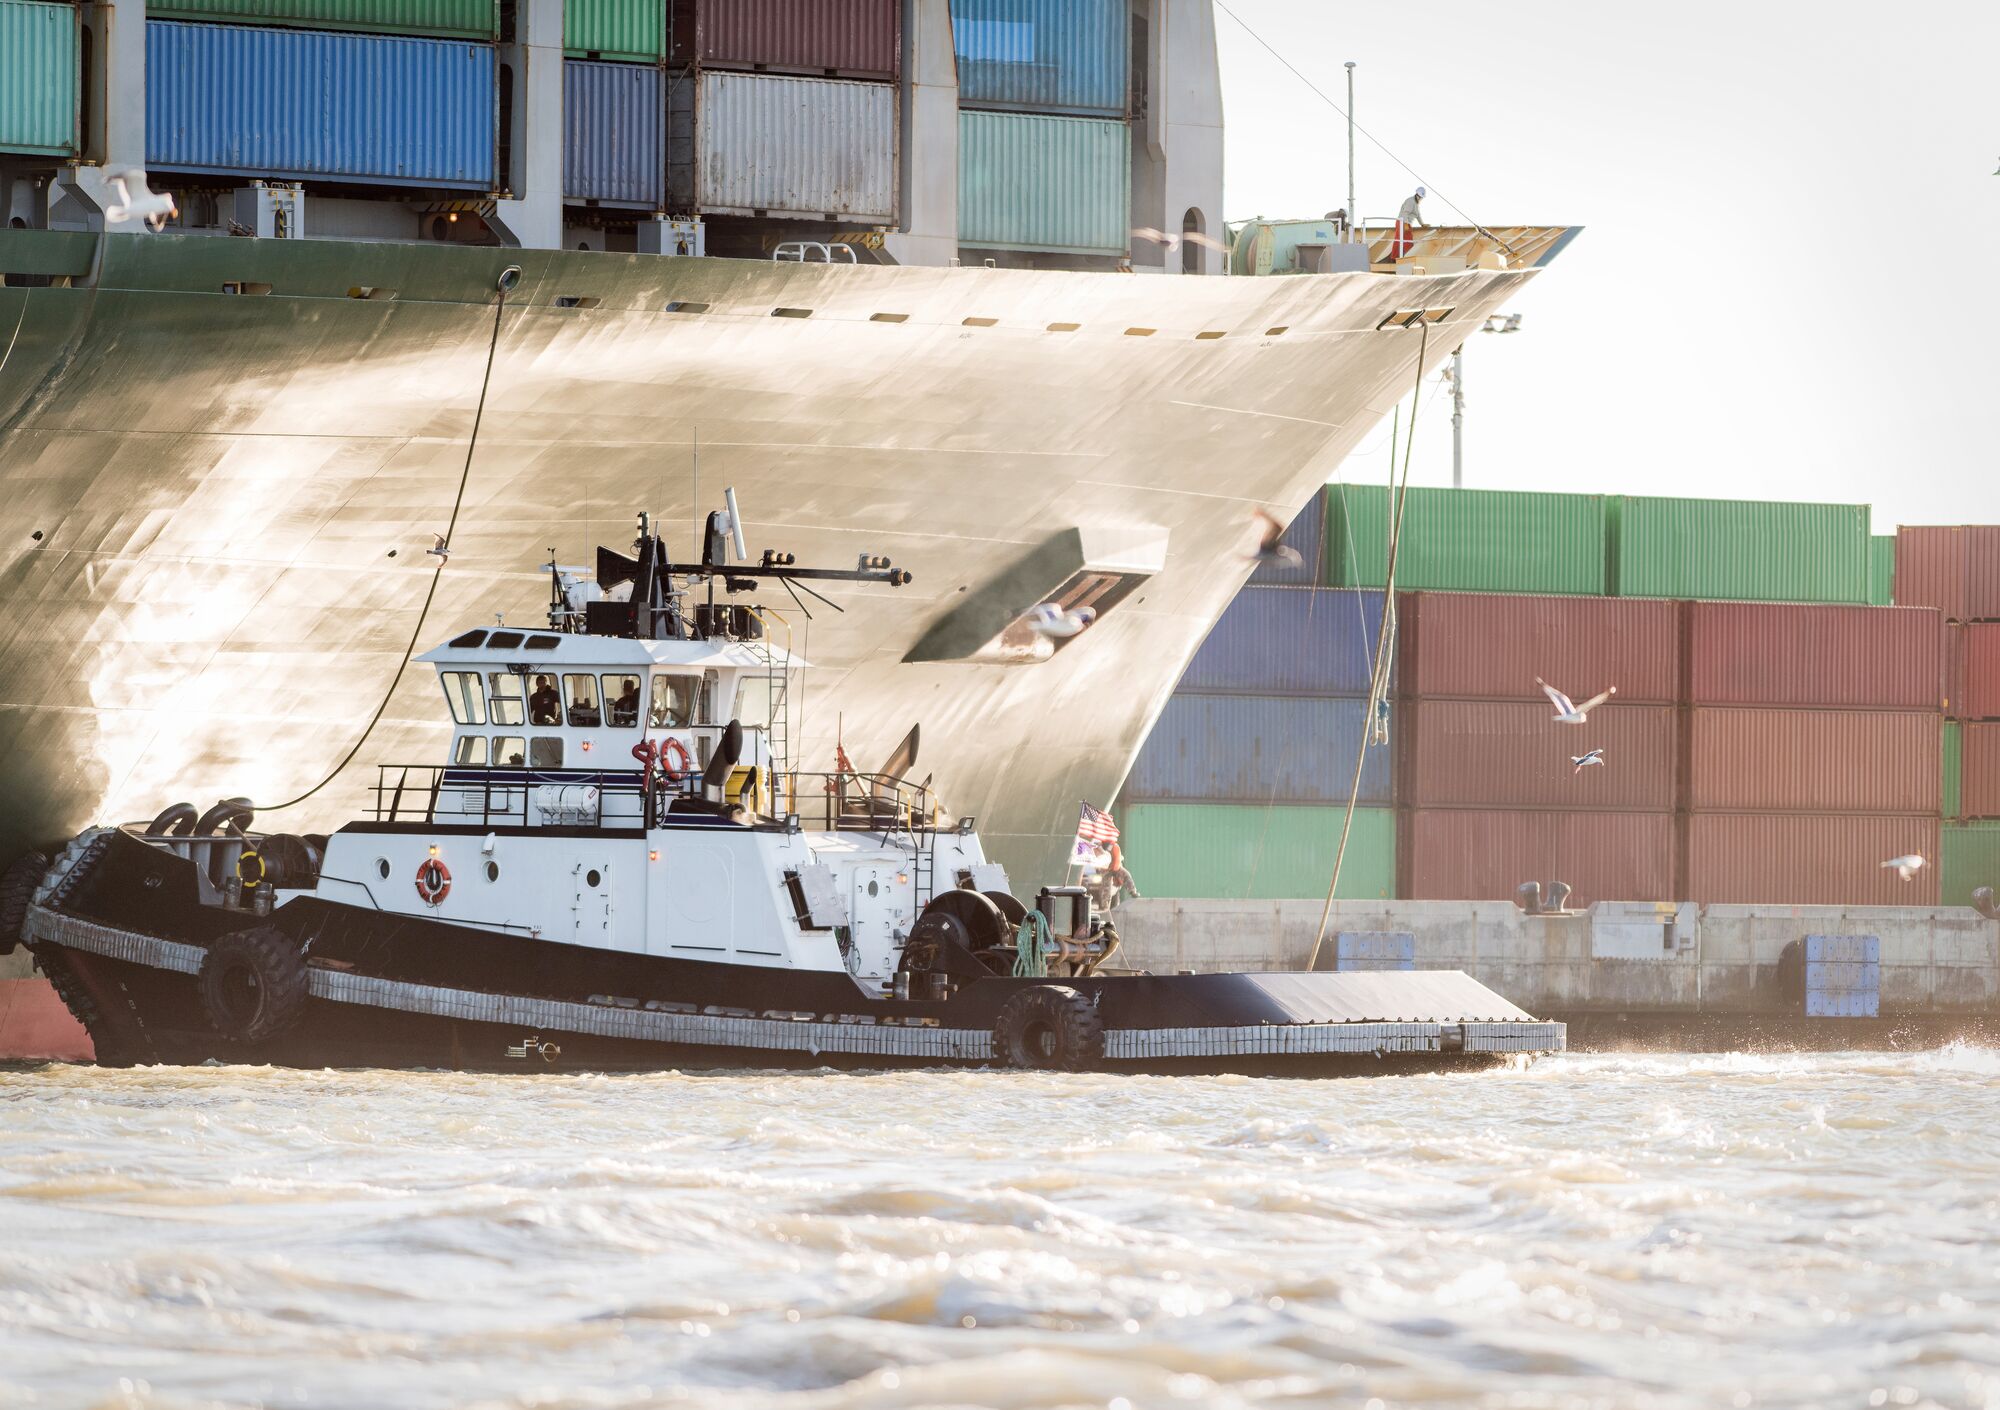 A tug boat helps a large container ship at the Port of Oakland in Oakland, California.